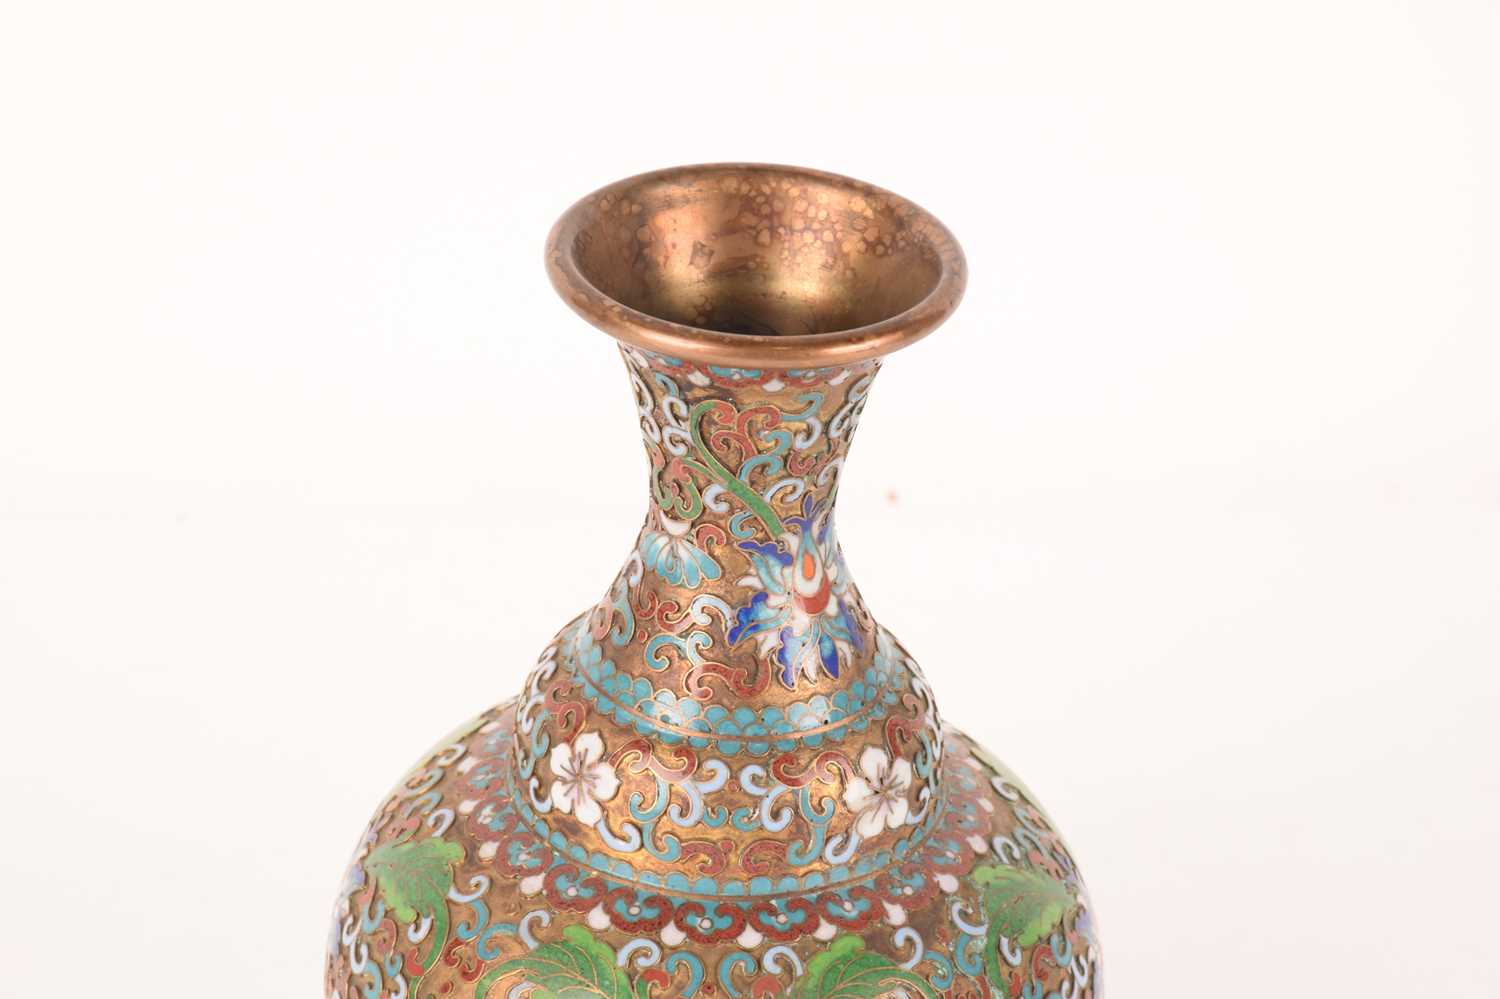 A 20th-century Chinese cloisonne and champleve enamel vase with polychrome enamel scrolls and foliag - Image 5 of 7